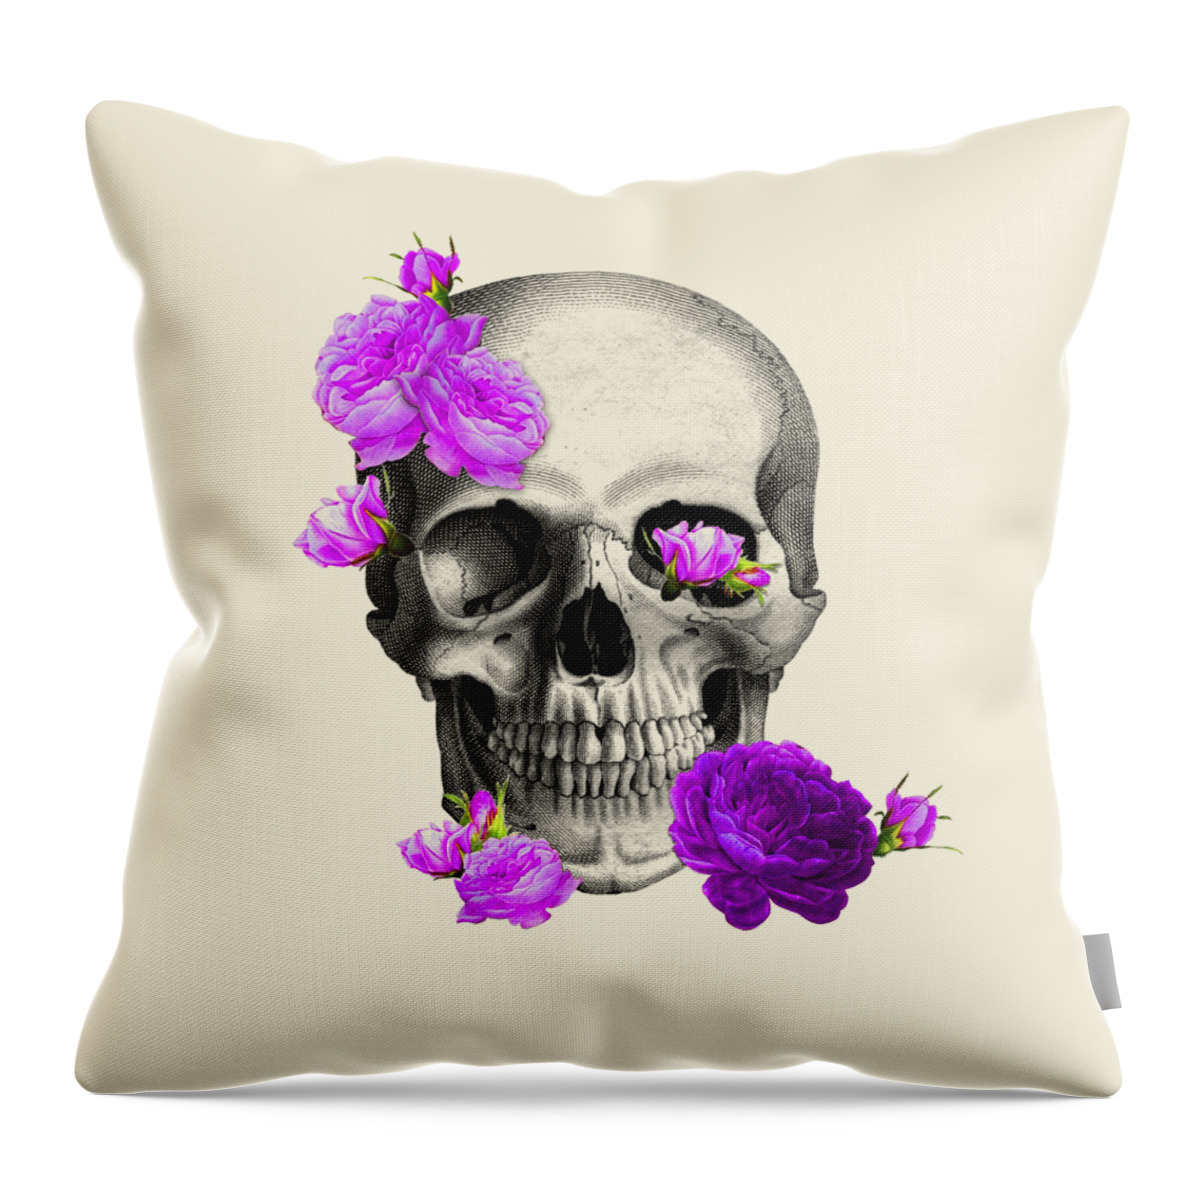 Skull Throw Pillow featuring the digital art Skull with purple roses by Madame Memento